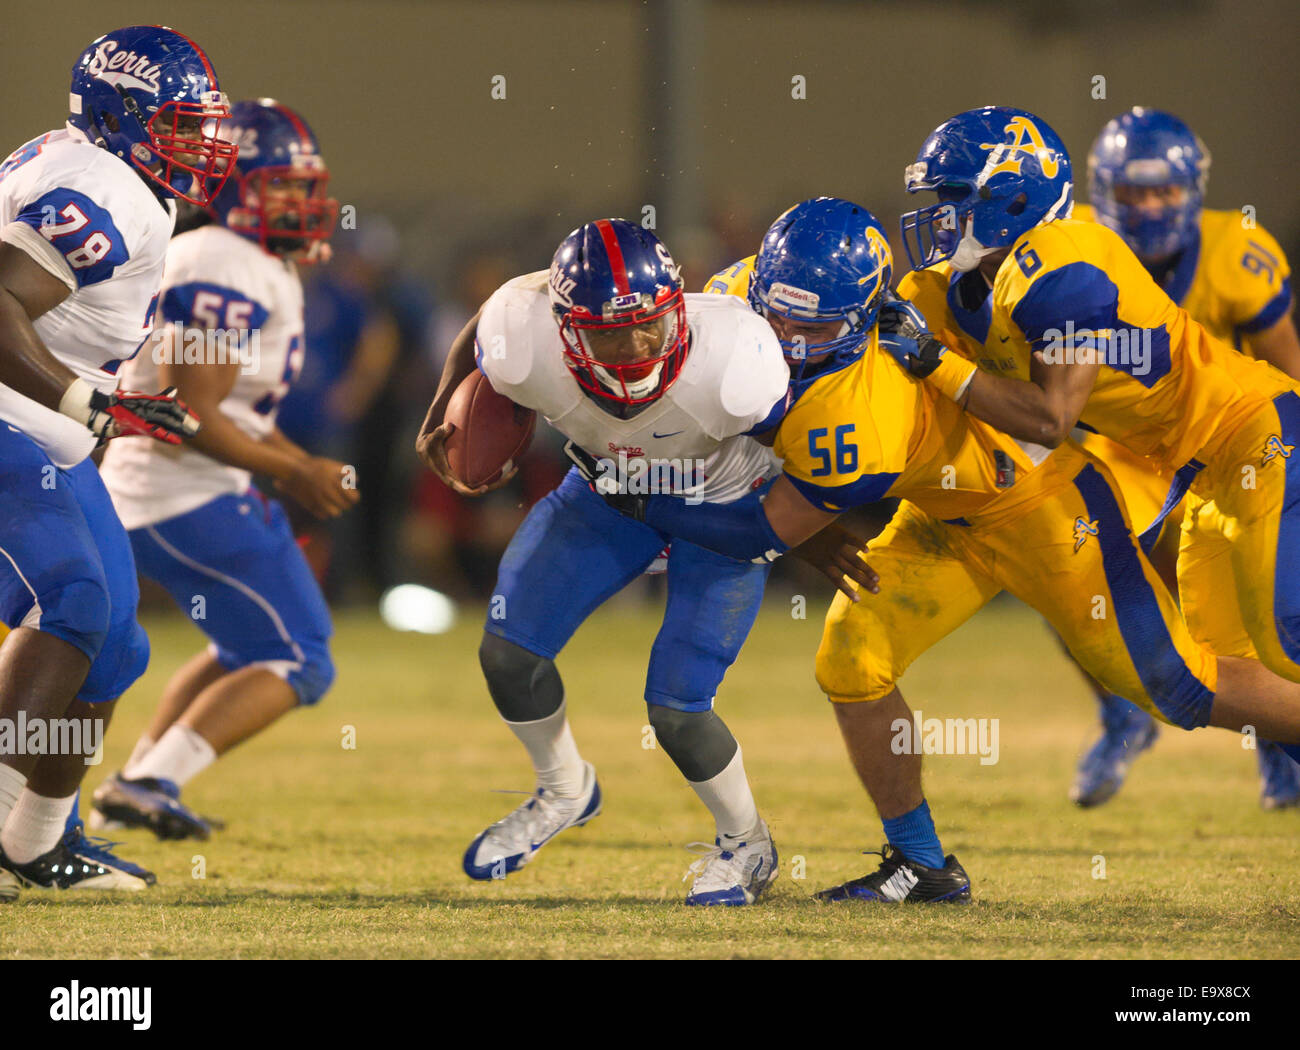 October 4, 2014, La Puente, CA.Gardena Serra cavaliers quarterback (14) Khalil Tate in action during the Bishop Amat upset of the Cavaliers at Bishop Amat high school on October 3, 2014. The Cavaliers who are usually a nationally ranked high school football team, were upset by Bishop Amat 14 - 7. (Mandatory Credit: Ed Ruvalcaba/MarinMedia.org) (Complete photographer, and company credit required) Stock Photo